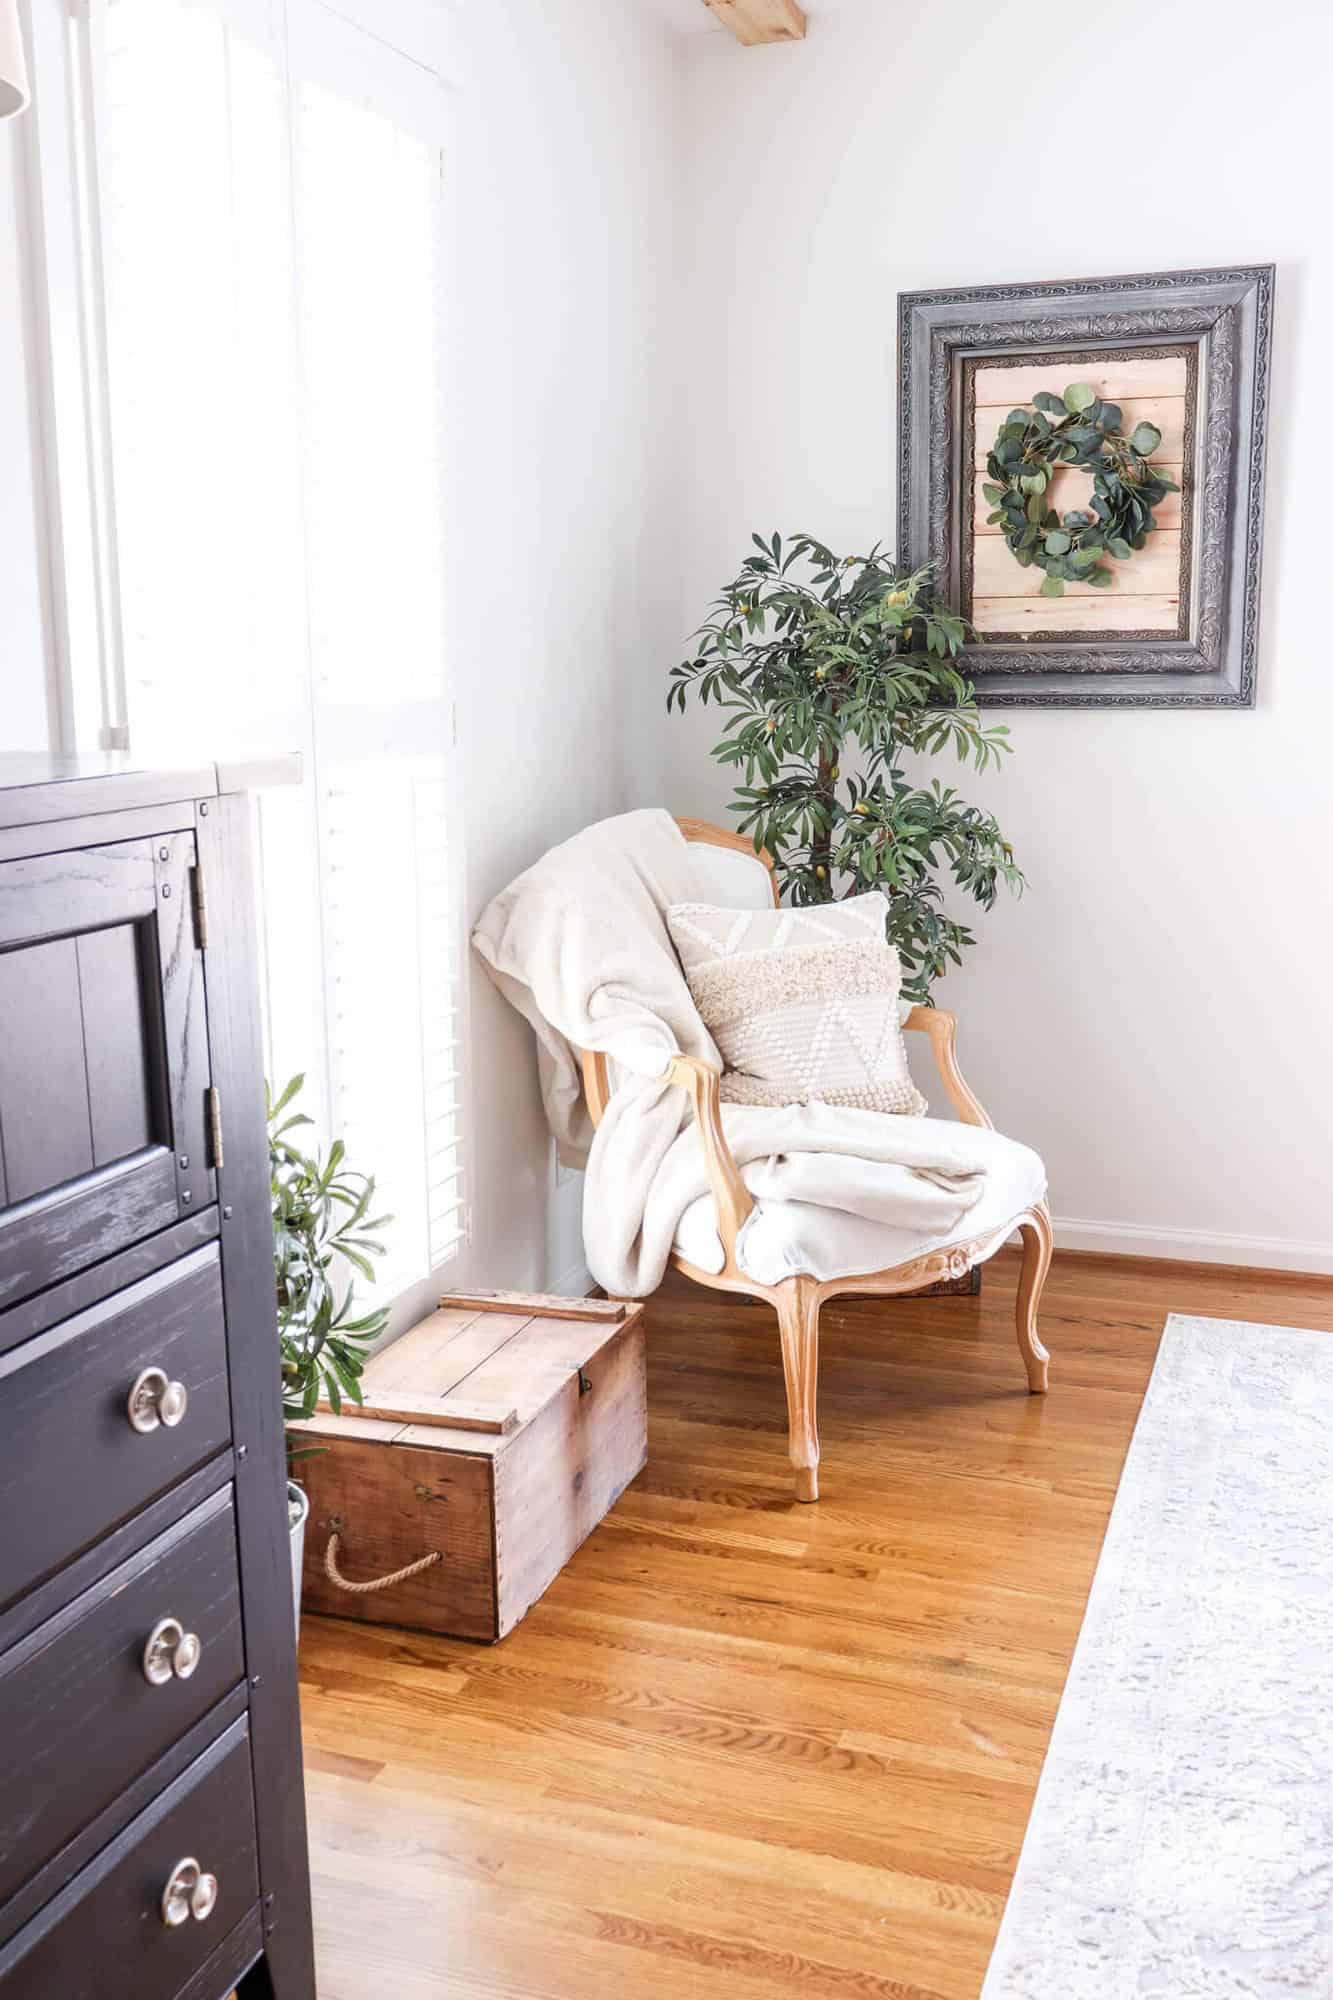 French armchair sitting in bedroom corner with olive tree and framed shiplap wall art